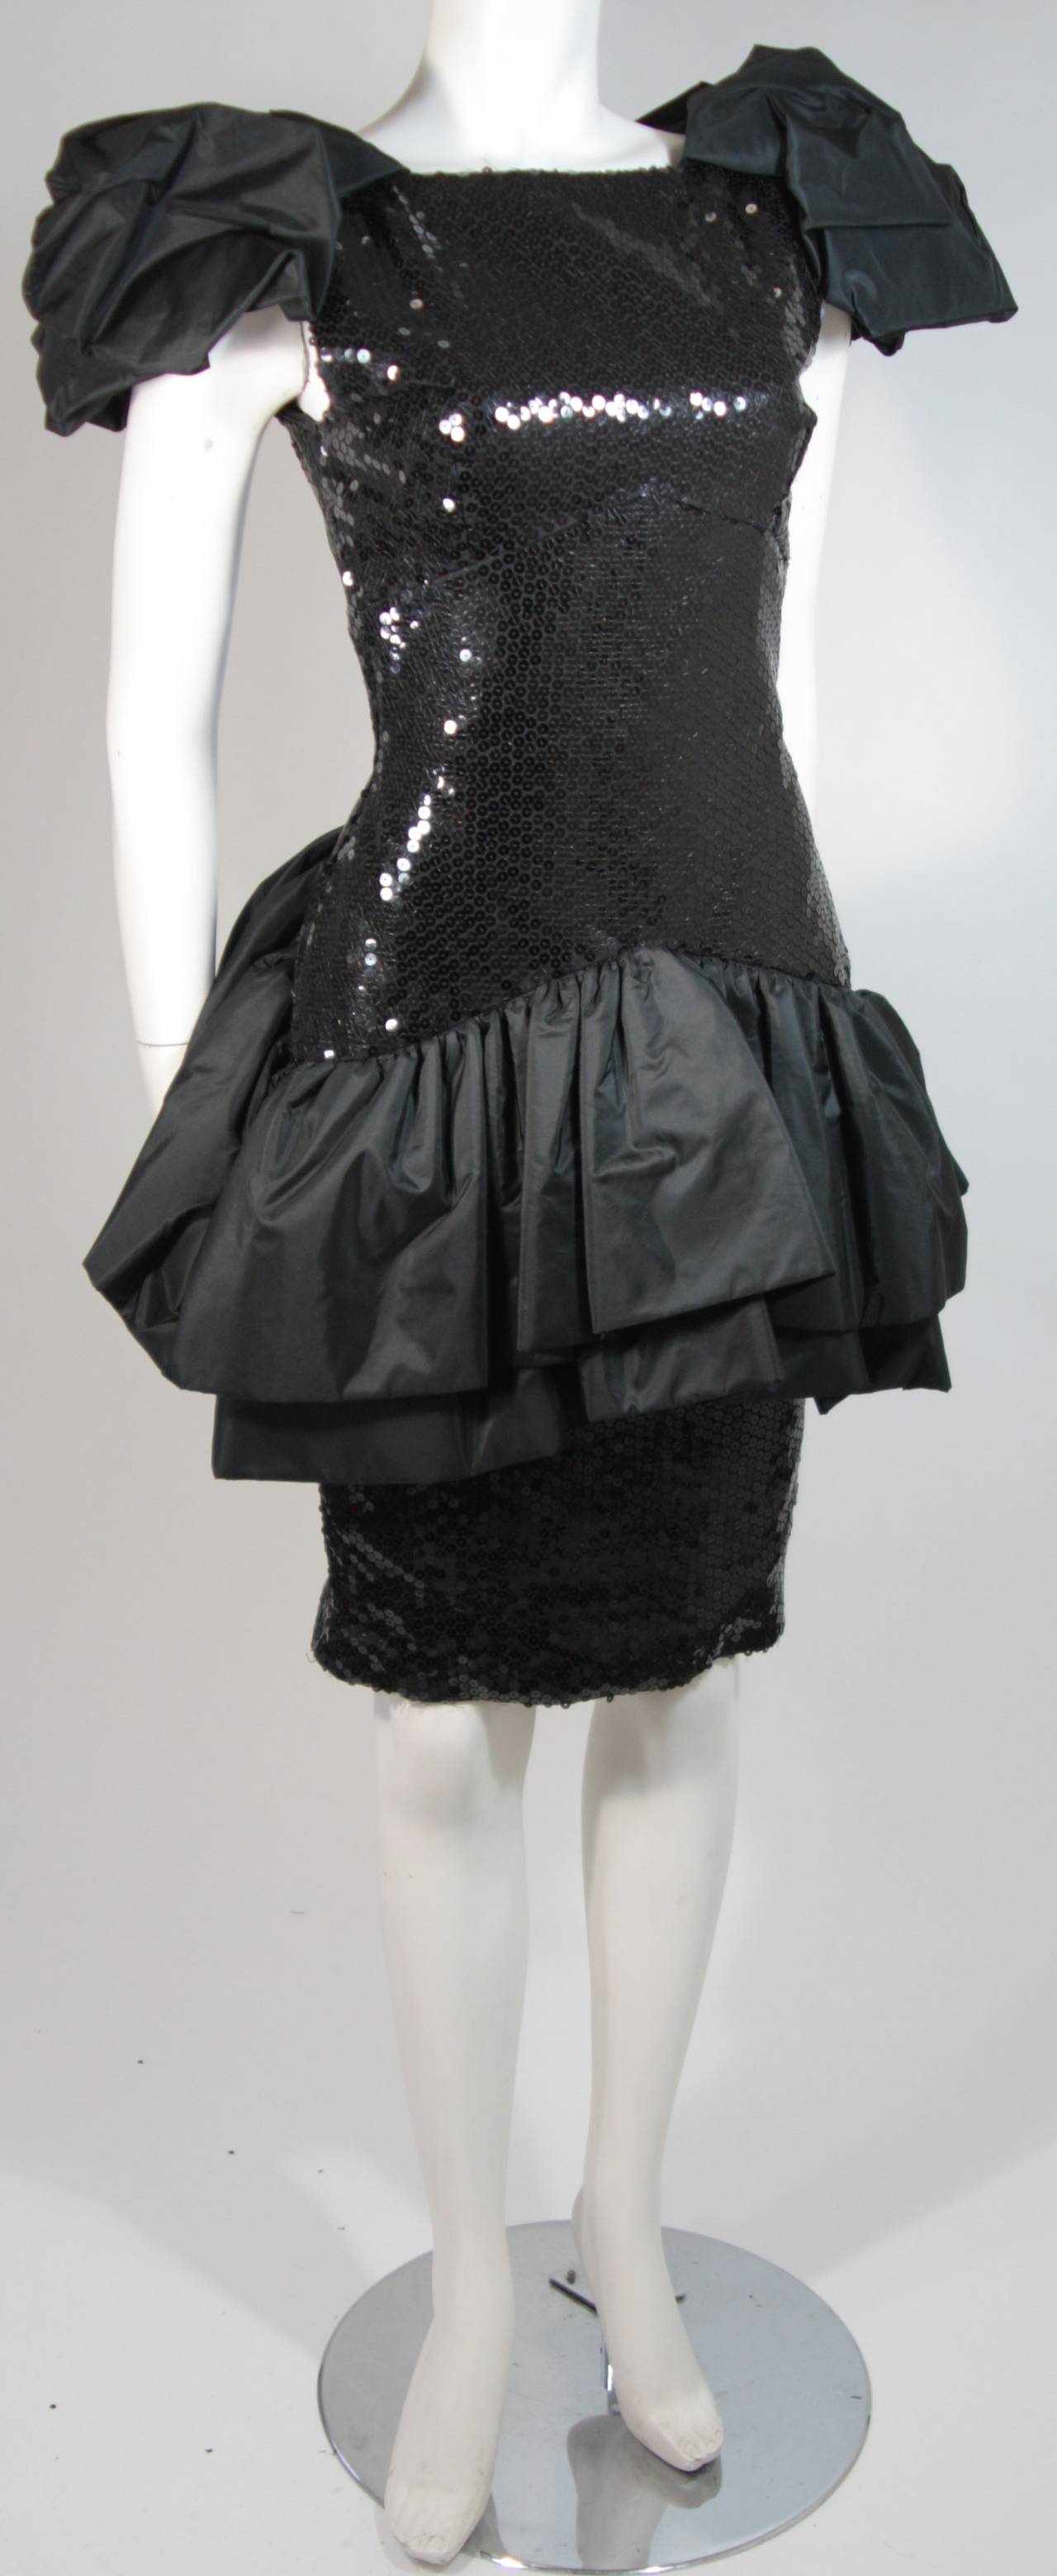 Vicky Tiel Black Sequin Cocktail Dress with Dramatic Gathers Size 38 1